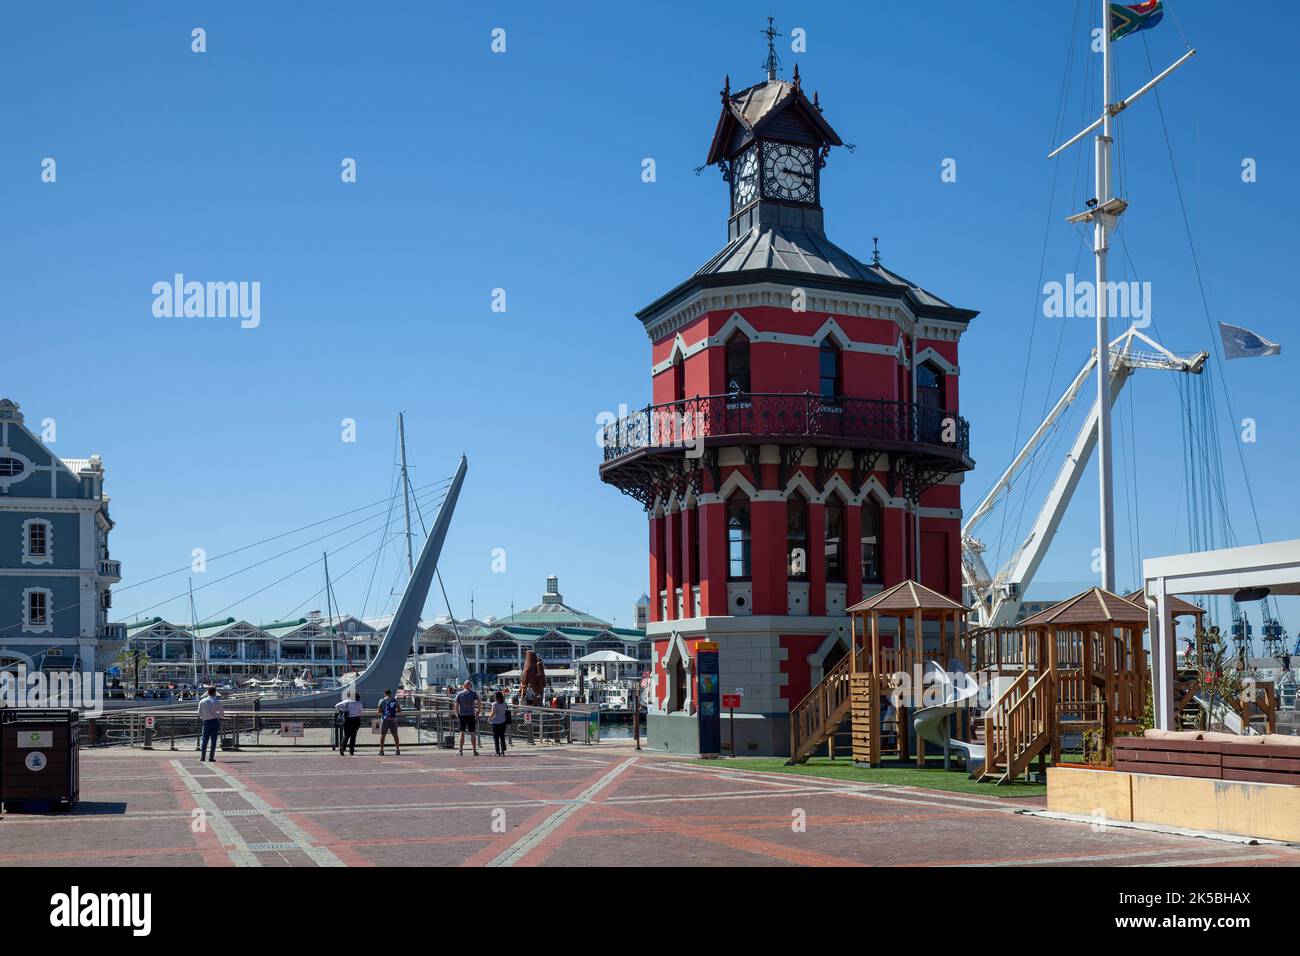 Redbrick Victorian Clockhouse Landamrk at V&A Waterfront - Cape Town, South Africa Stock Photo